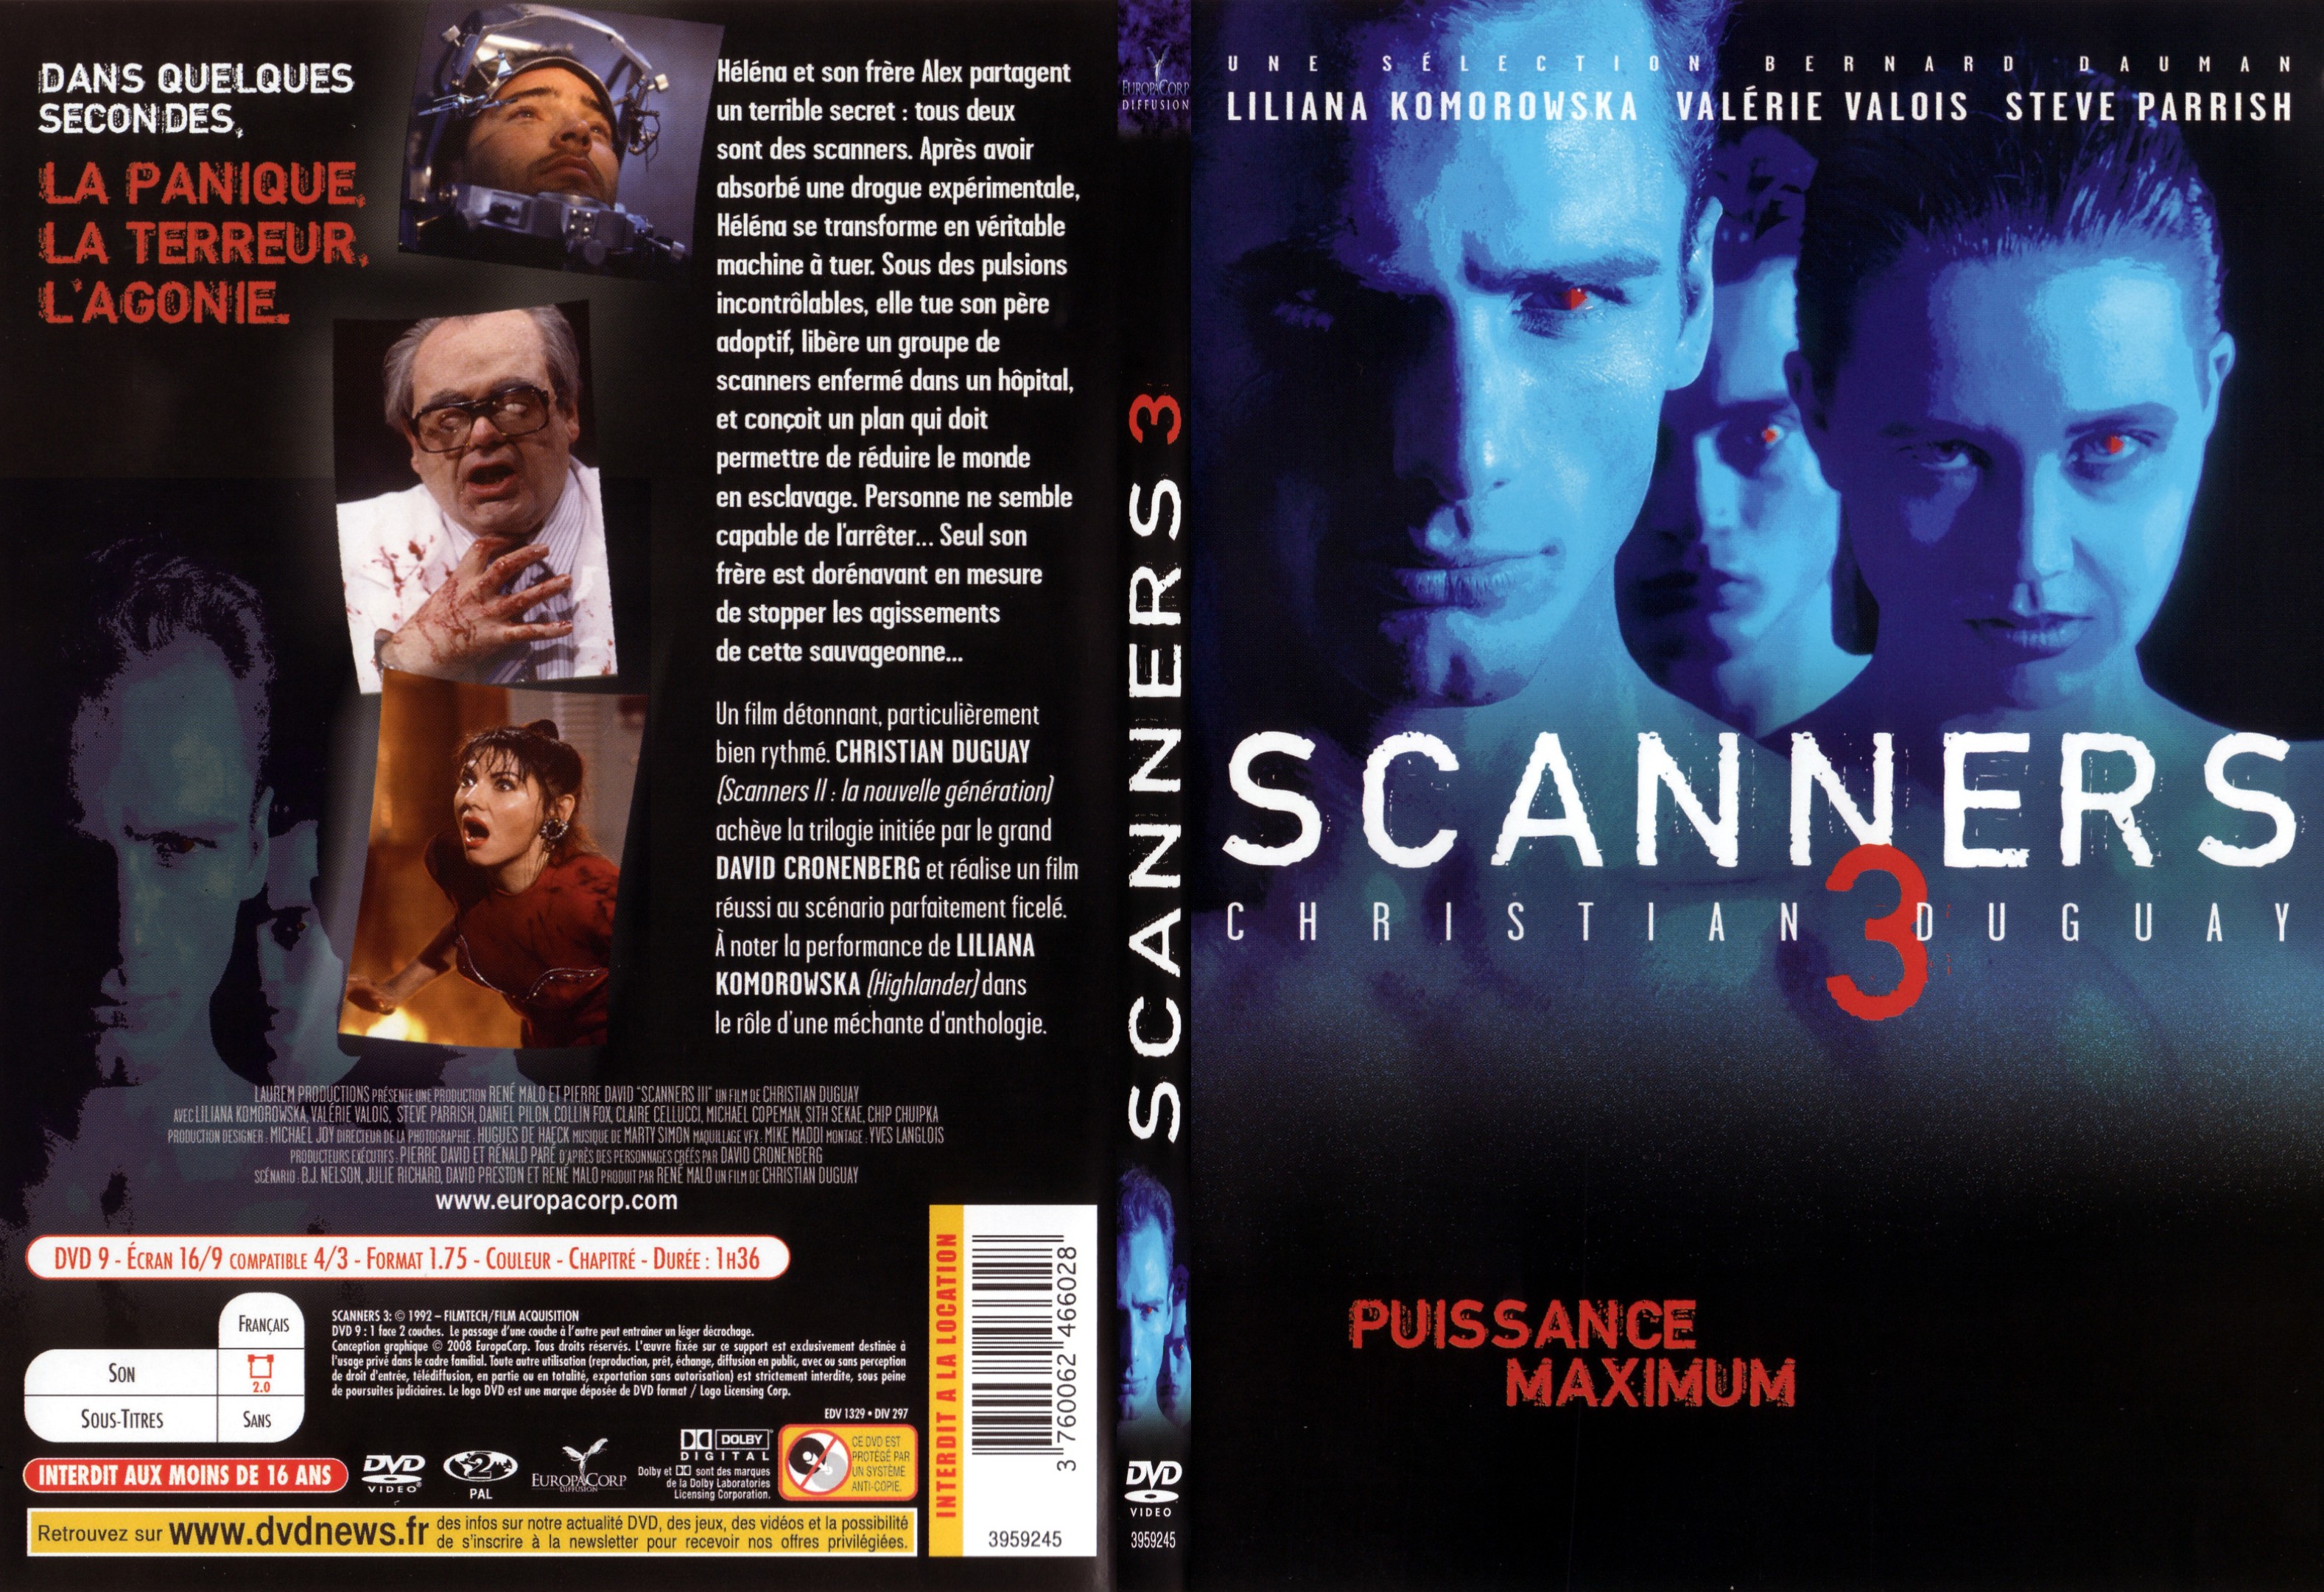 Jaquette DVD Scanners 3 - SLIM